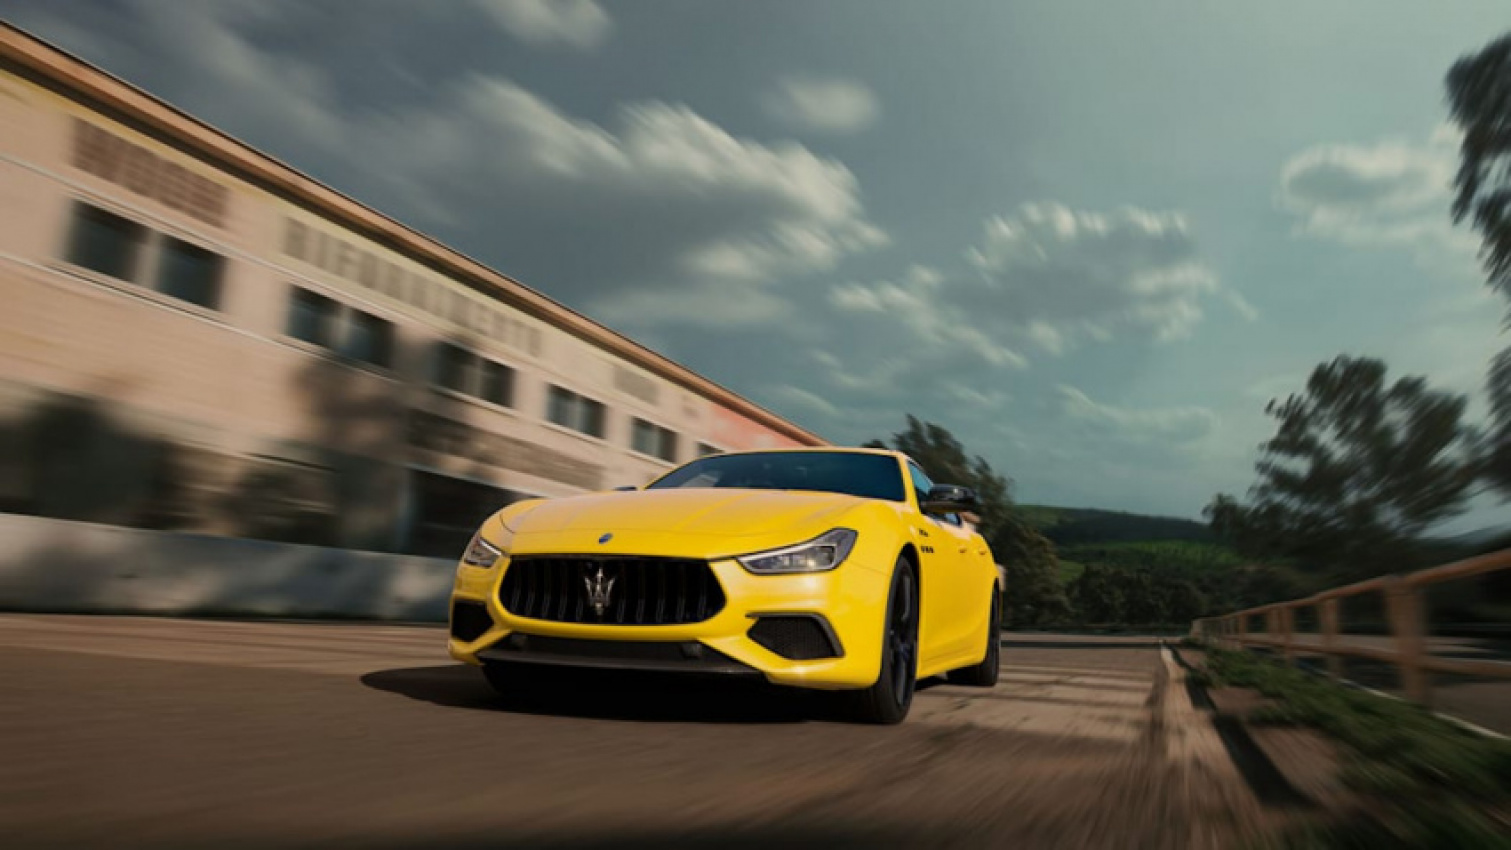 autos, cars, design/style, maserati, luxury, performance, sedan, special and limited editions, maserati highlights its racing heritage with mc edition models